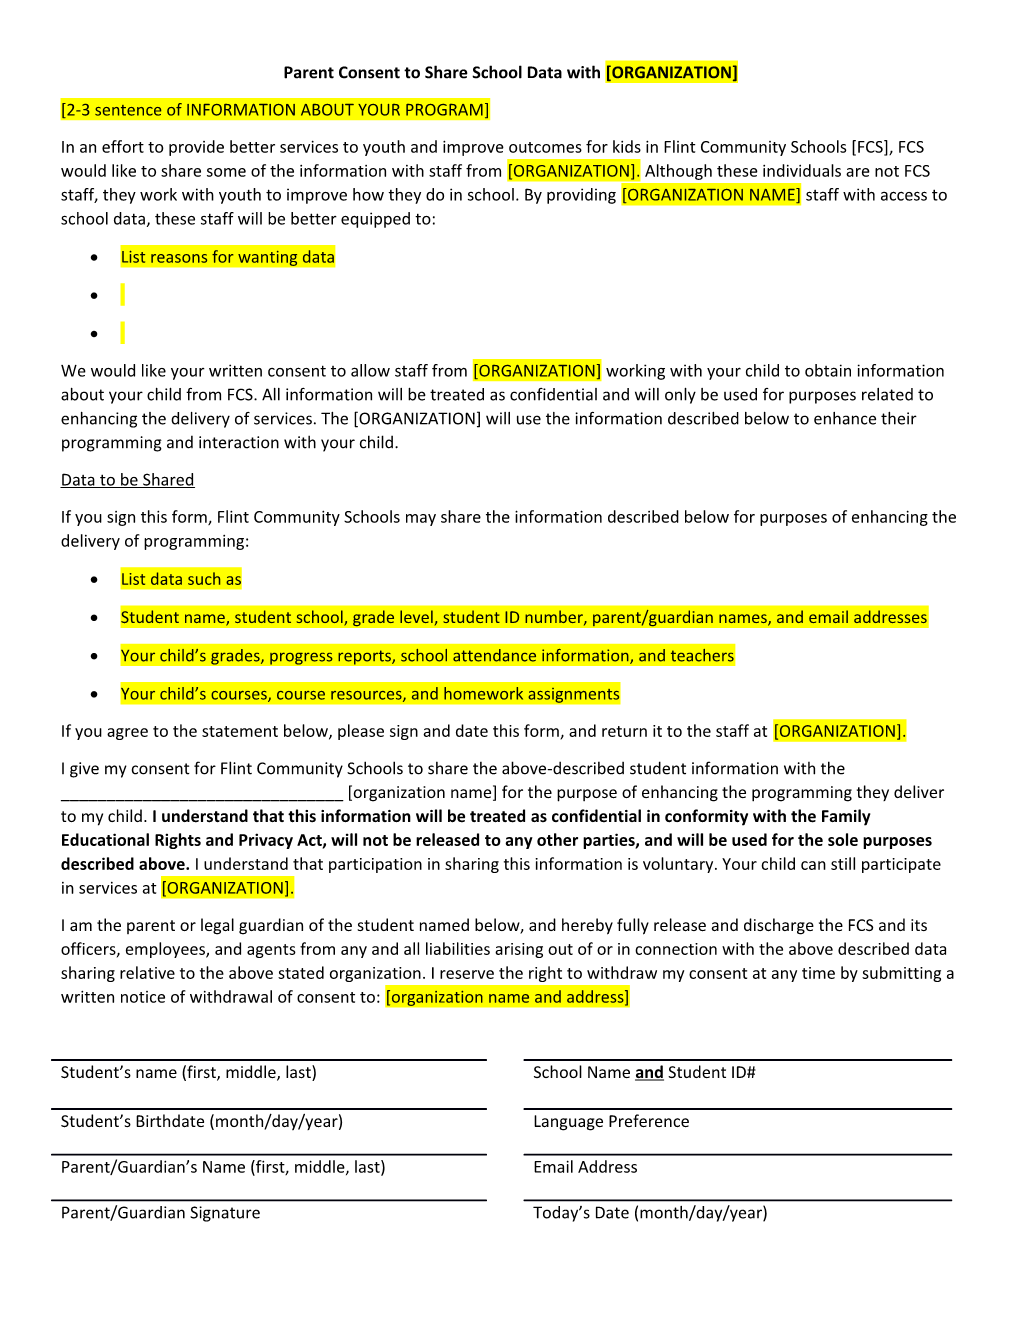 Parent Consent to Share School Data with ORGANIZATION